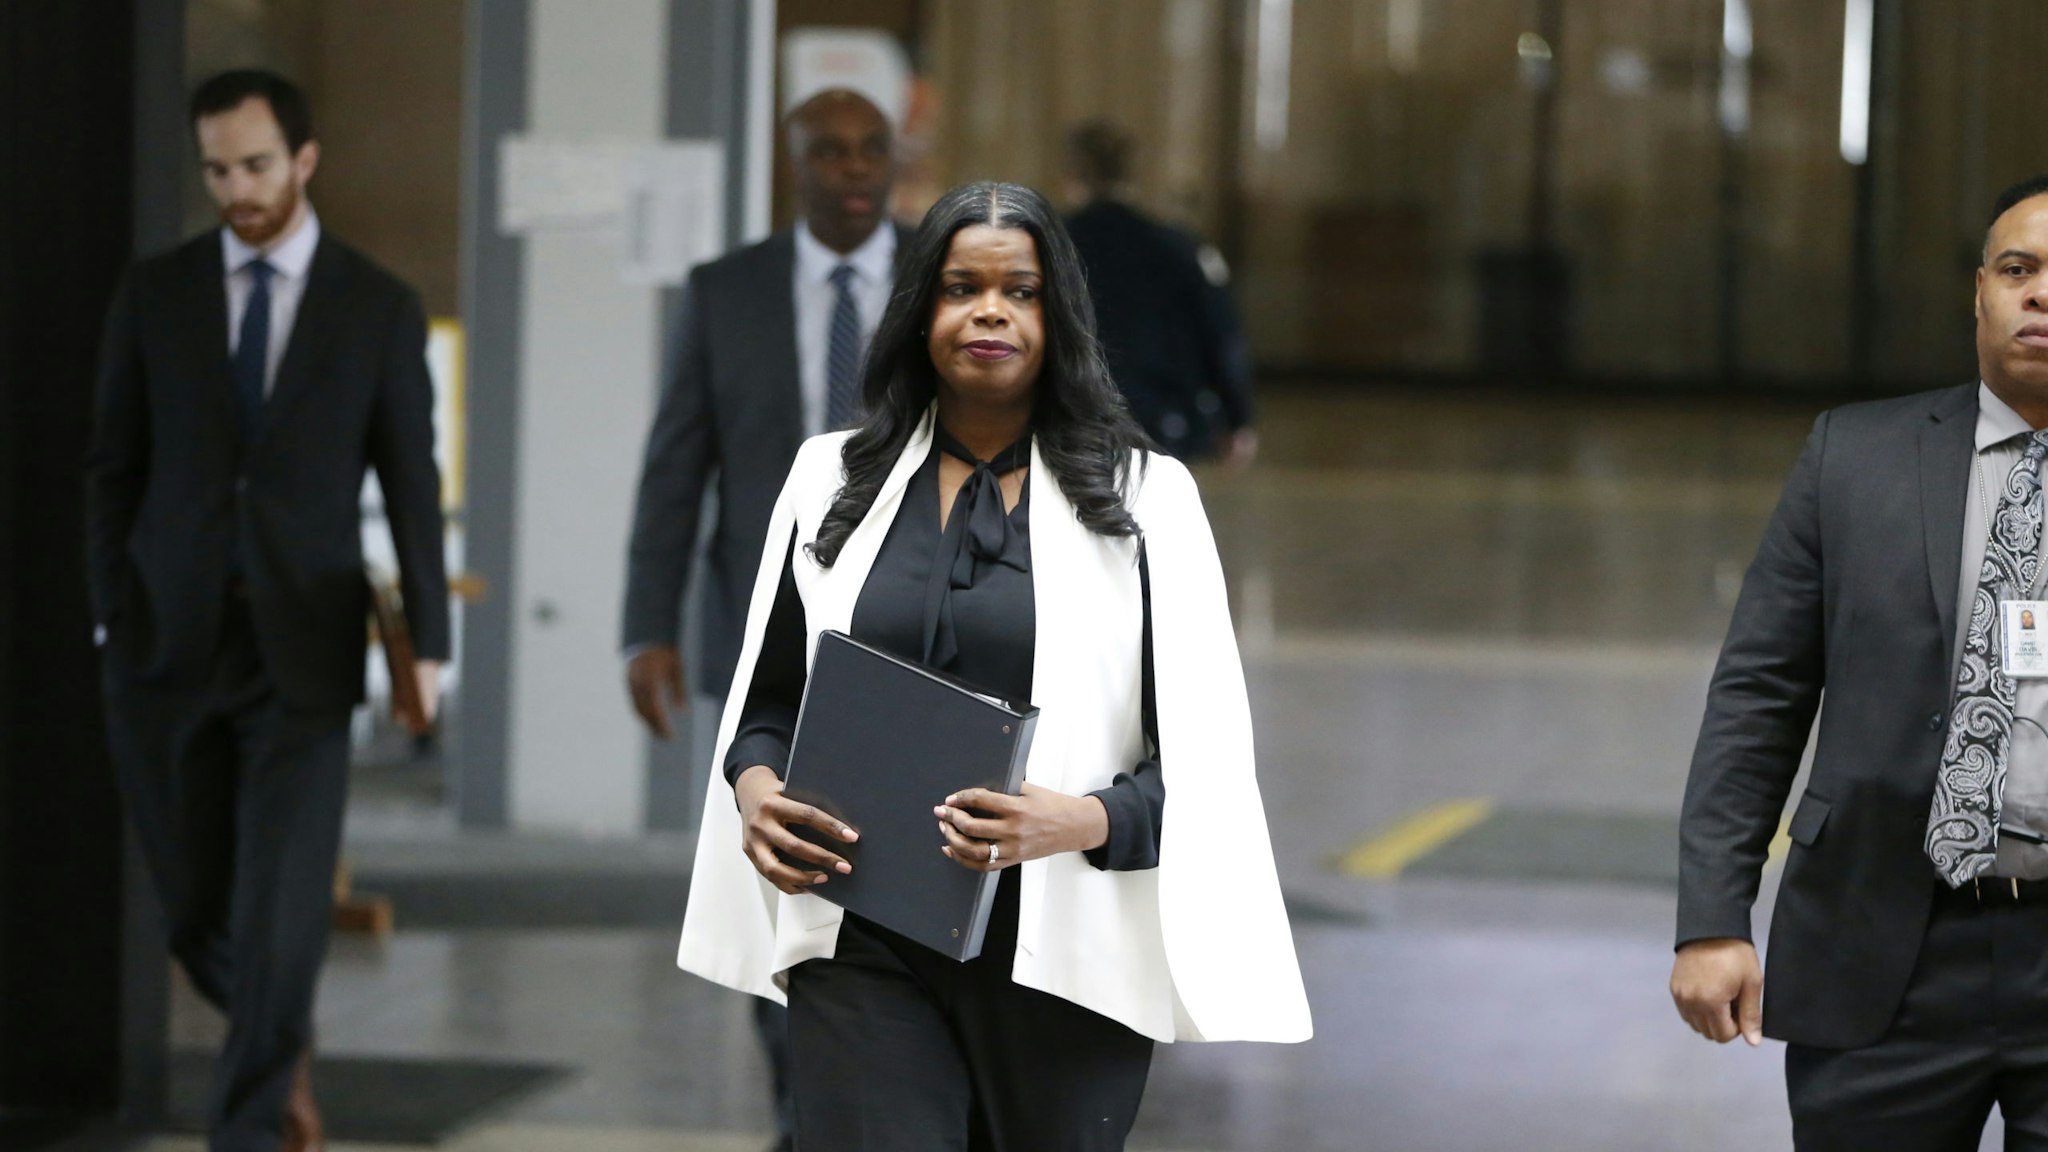 CHICAGO, IL - FEBRUARY 23: Cook County State's attorney Kim Foxx arrives to speak with reporters and details the charges against R. Kelly's first court appearance at the Leighton Criminal Courthouse on February 23, 2019 in Chicago, Illinois. (Photo by Nuccio DiNuzzo/Getty Images)